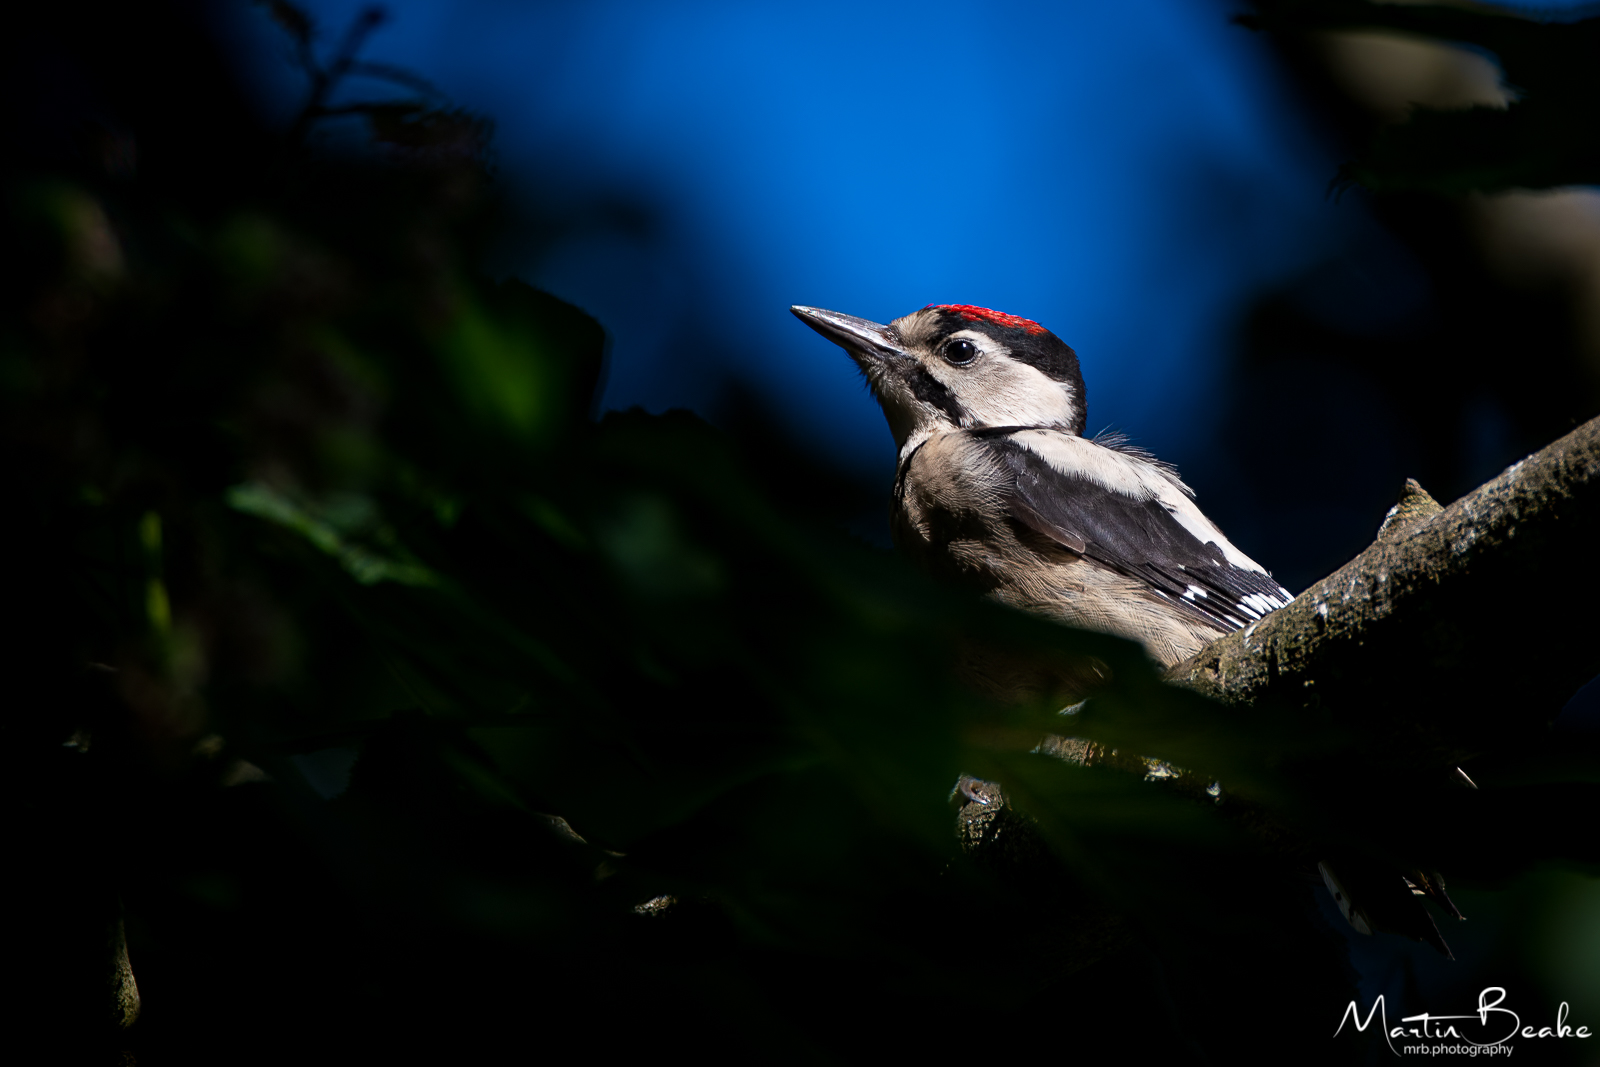 Adolescent Great Spotted Woodpecker